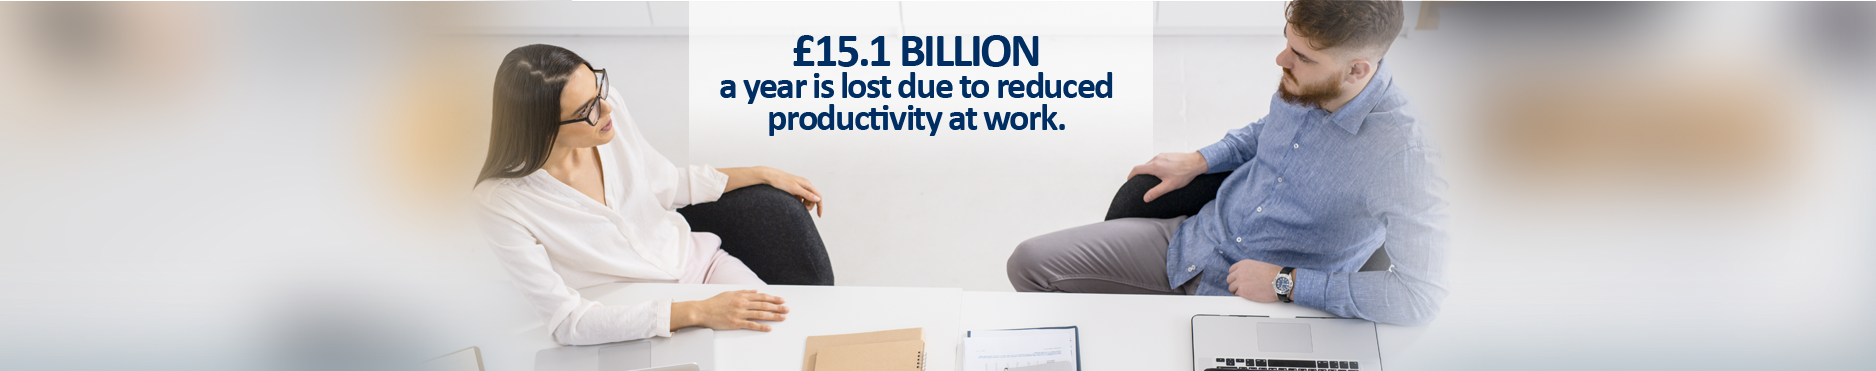 £15.1 BILLION a year is lost due to reduced productivity at work.